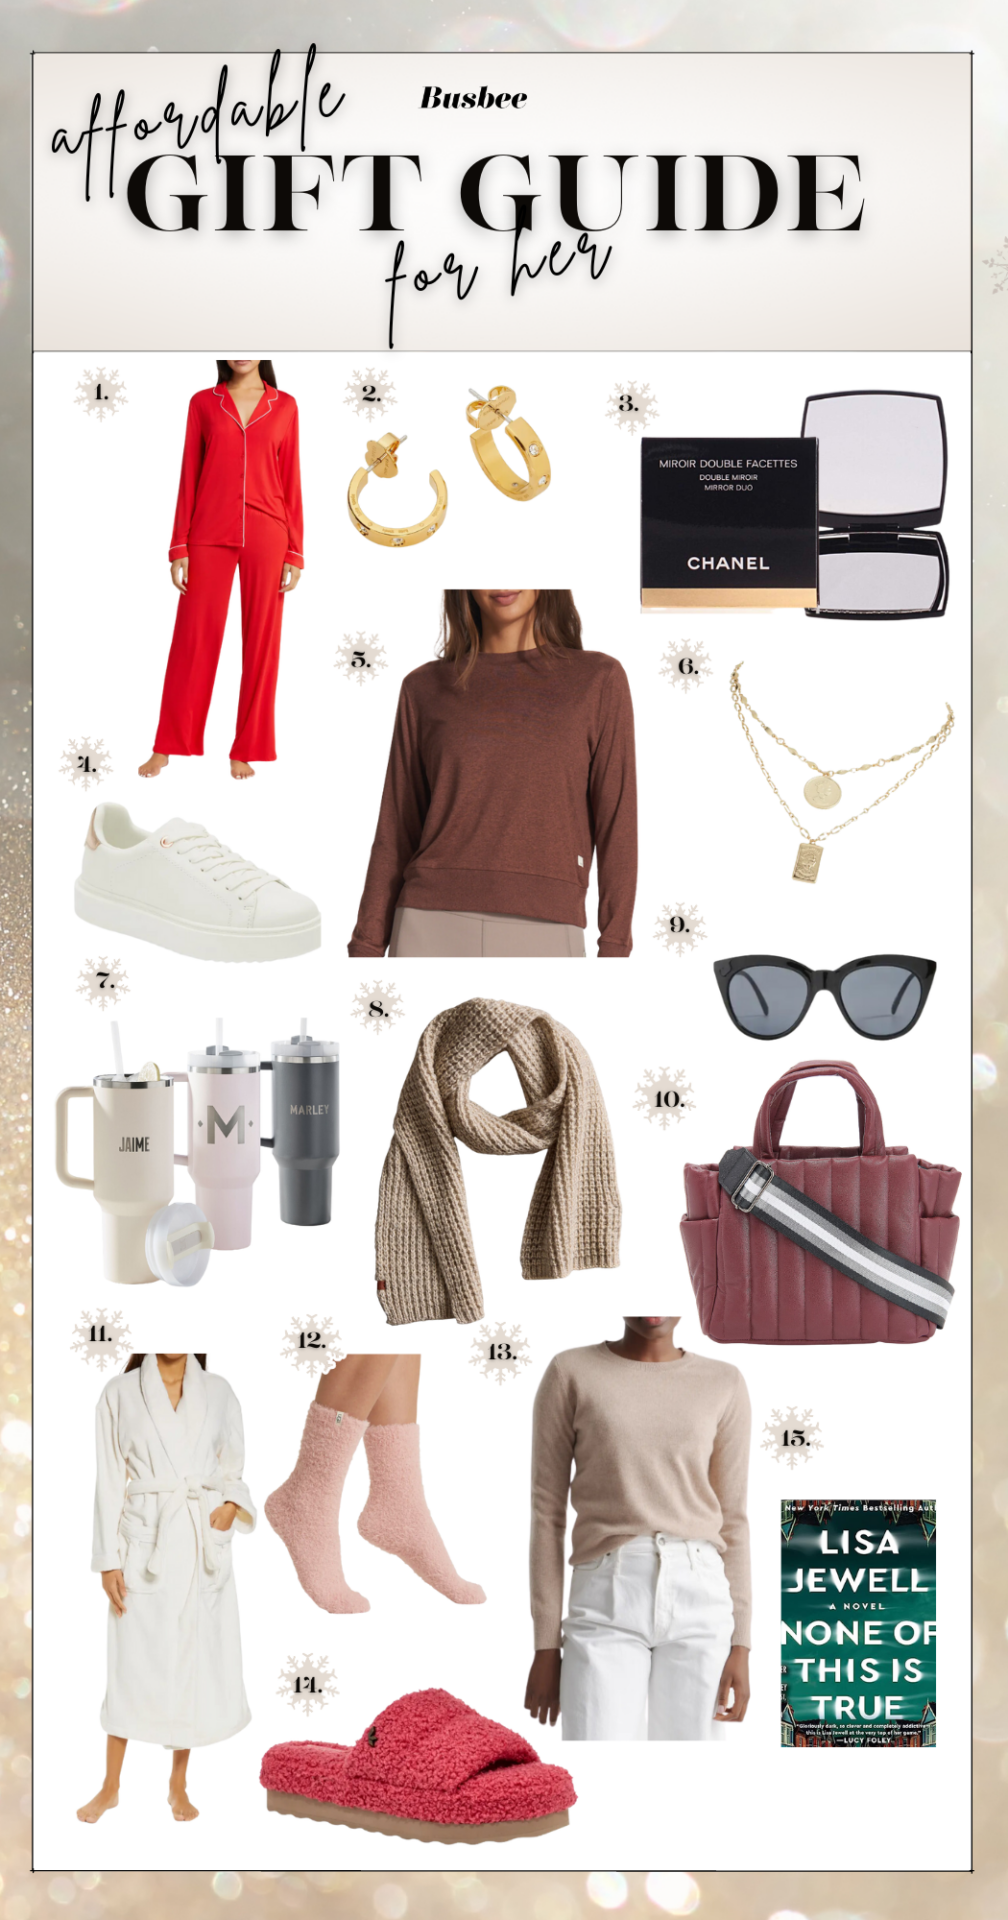 The Best Nordstrom Gifts 2022 to Shop This Holiday Season | Vanity Fair